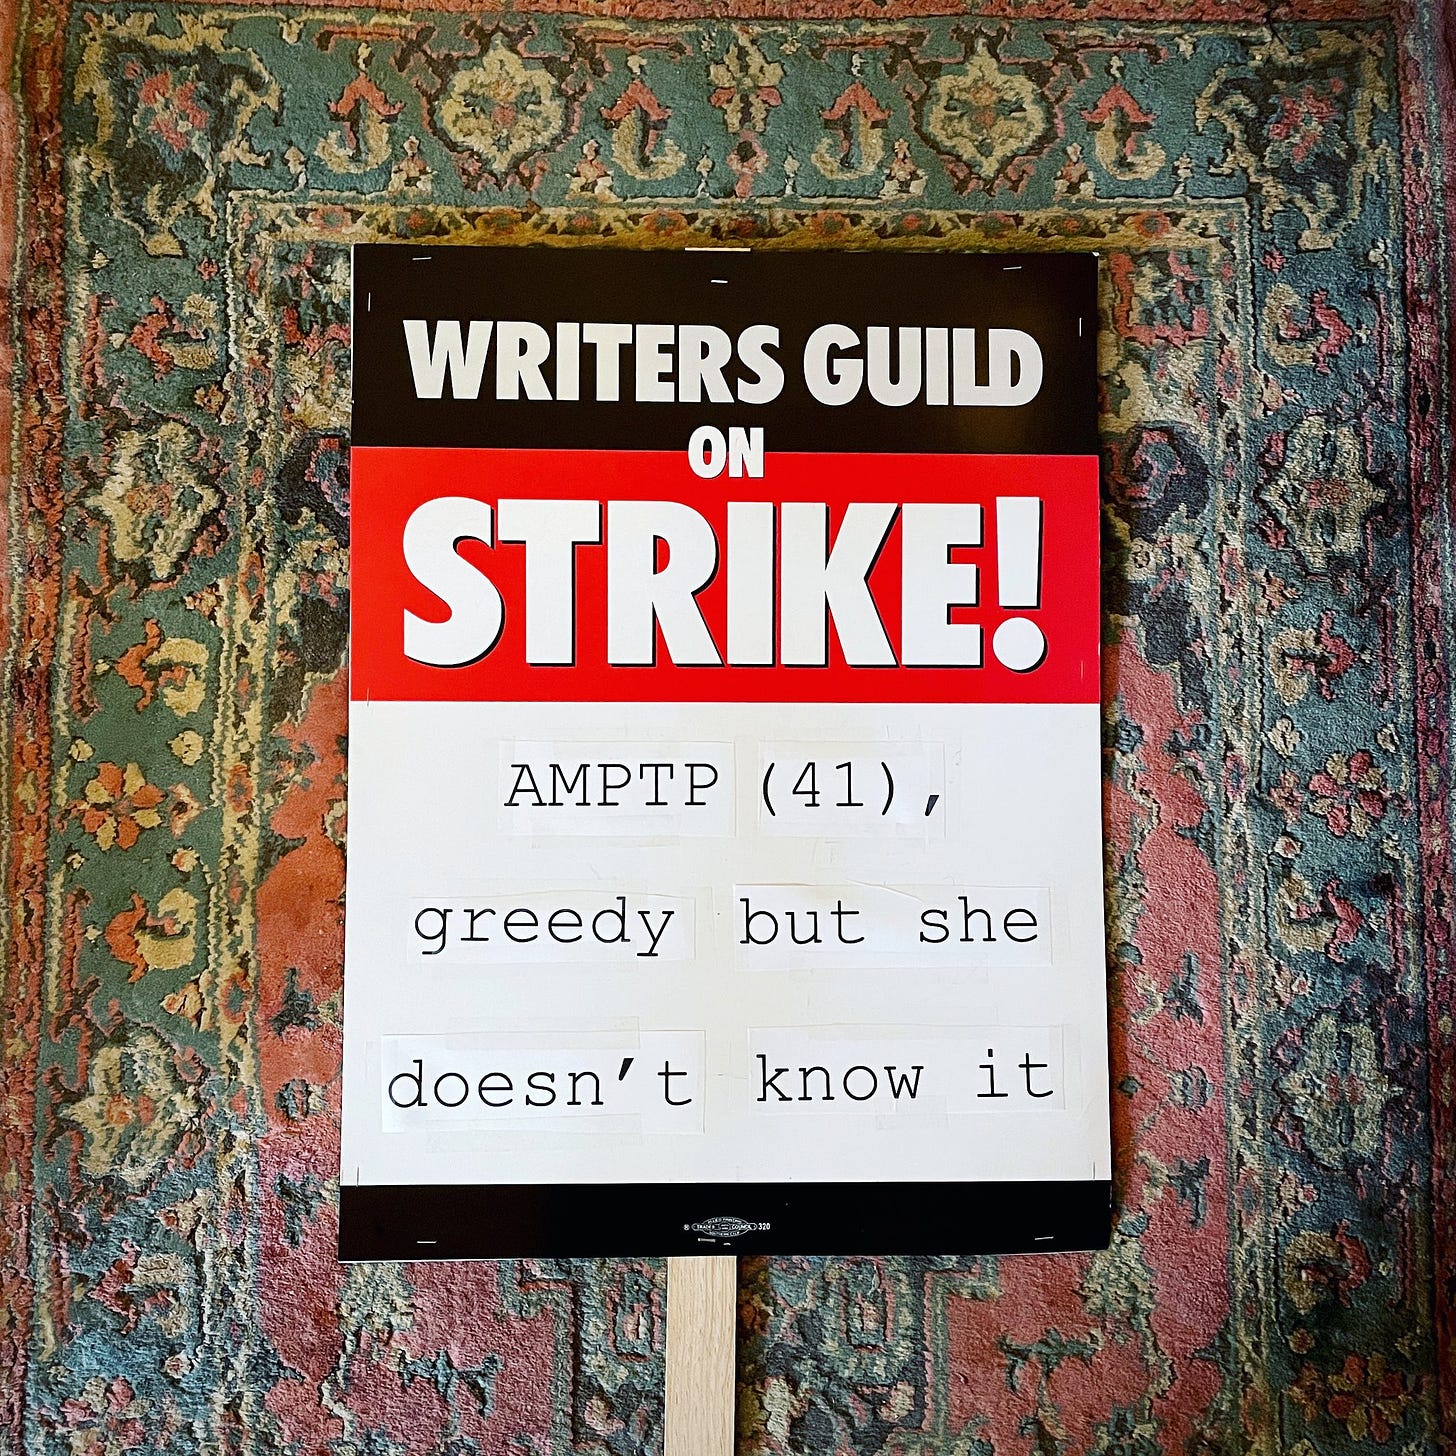 a "writers guild on strike" picket sign on a rug; the bottom half says "AMPTP (41), greedy but she doesn't know it"